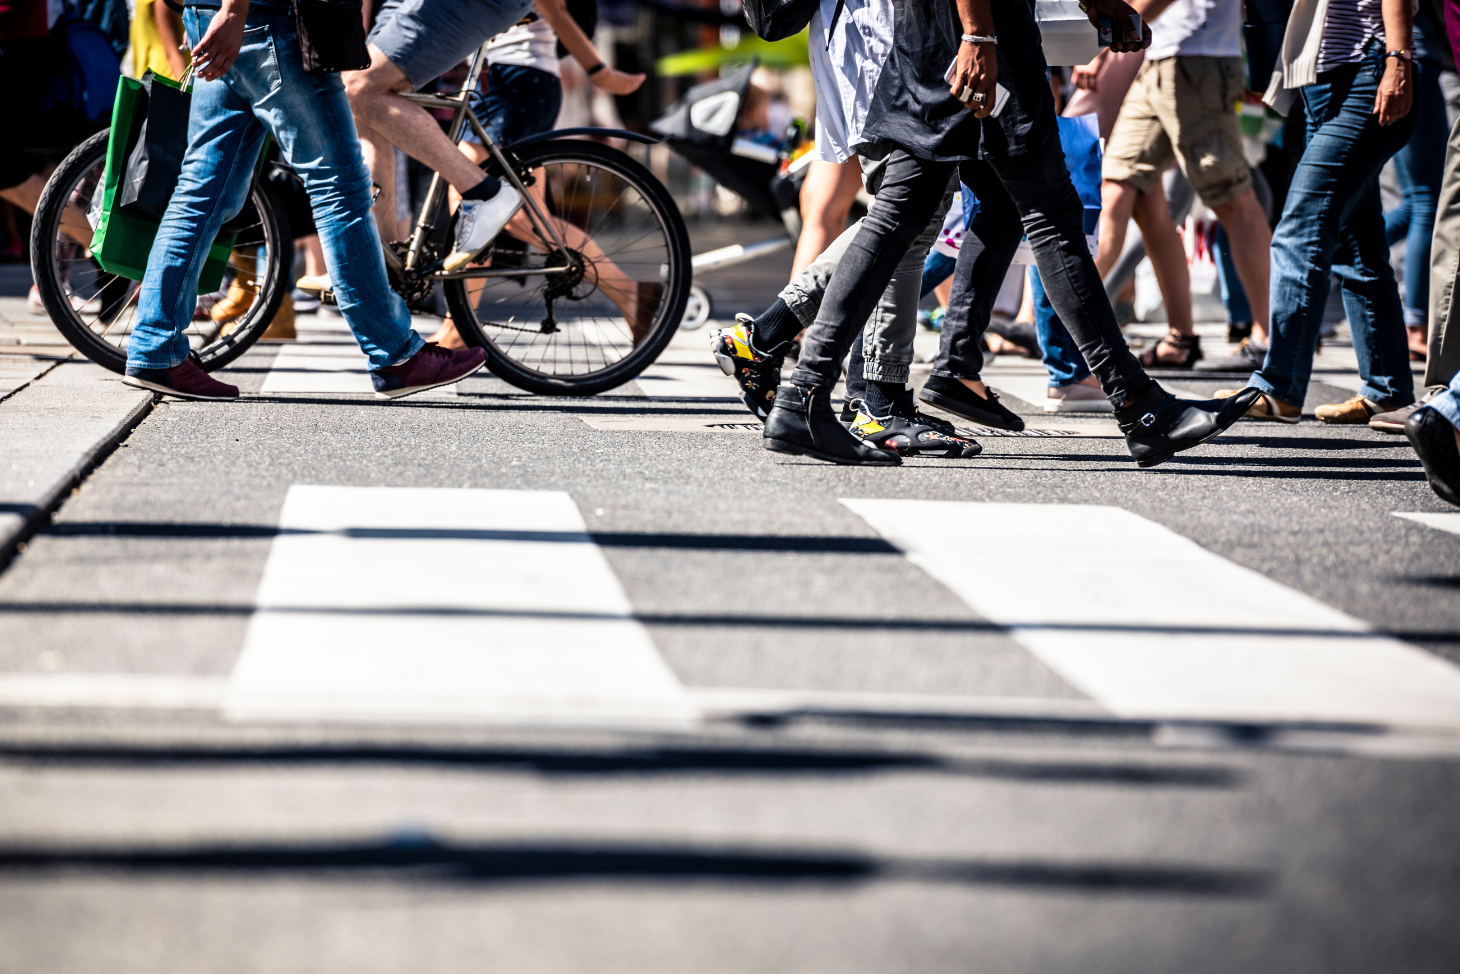 View of pedestrians and bicyclists crossing the street in a crosswalk